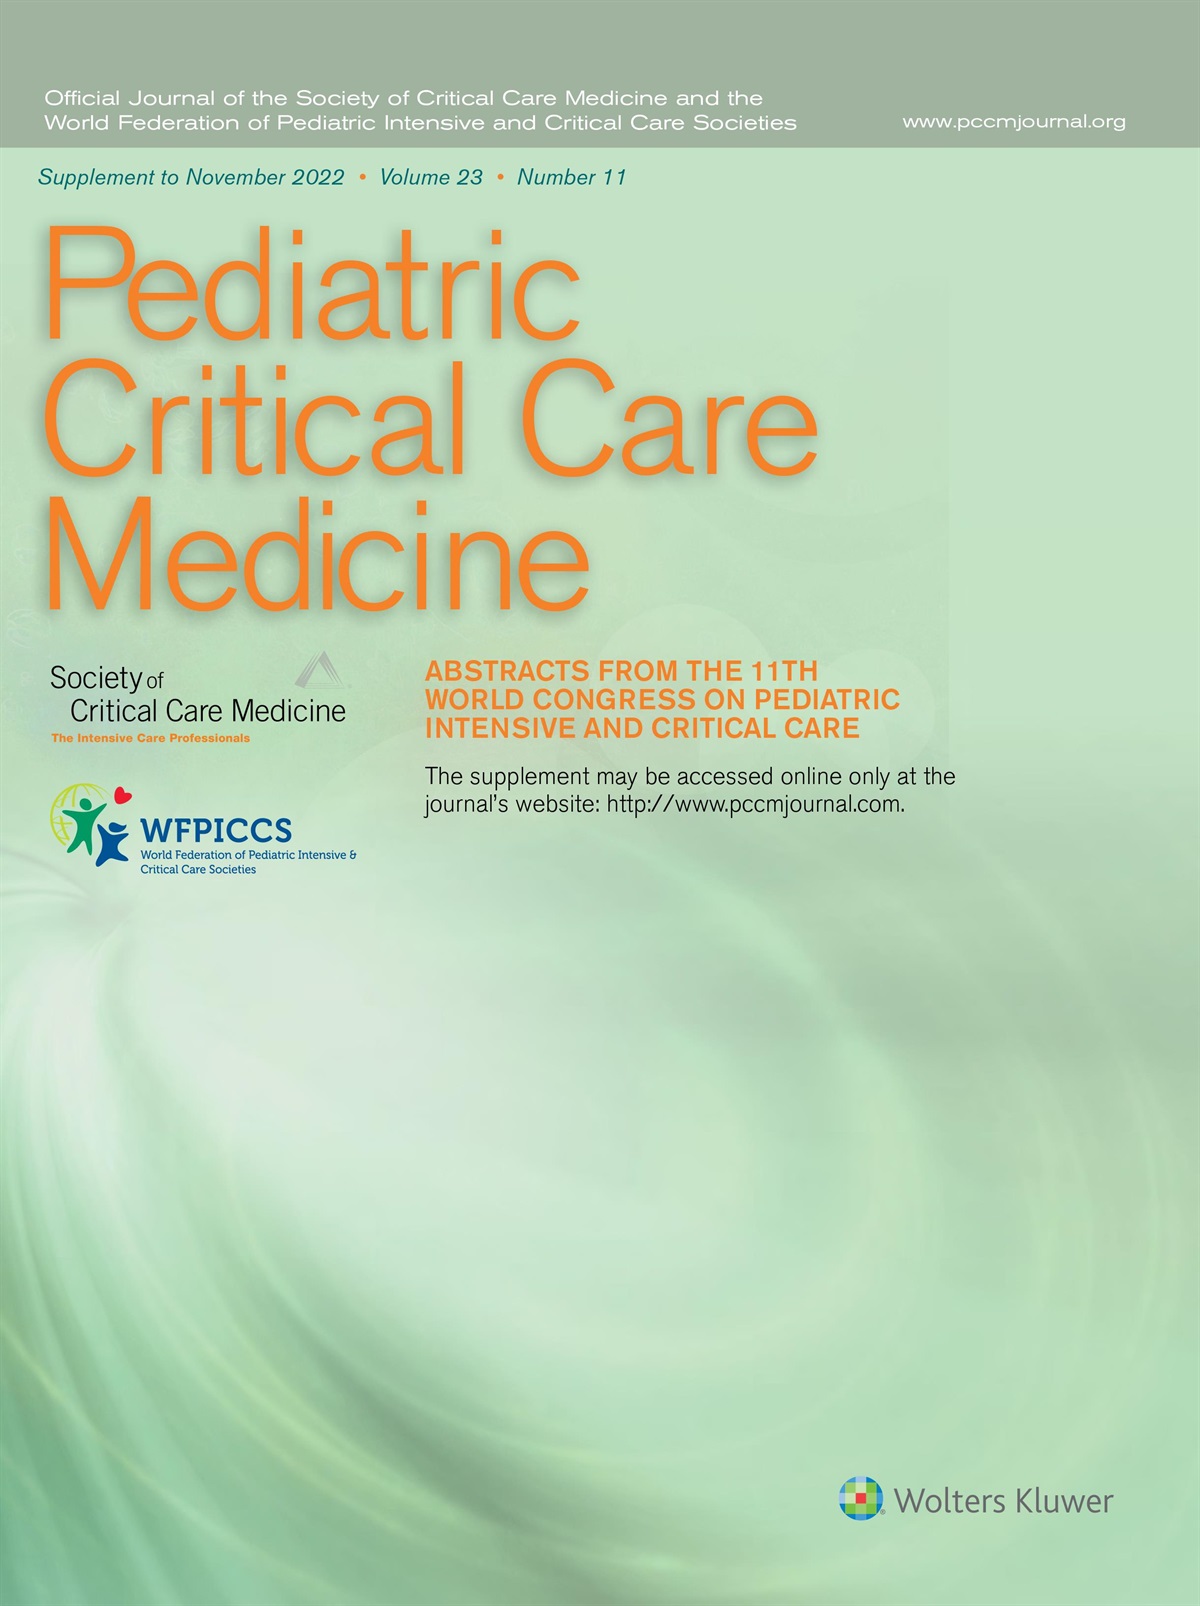 PP435 [Infections » Sepsis]: CLINICAL CHARACTERISTICS OF BACTERIAL SEPSIS IN CHILDREN